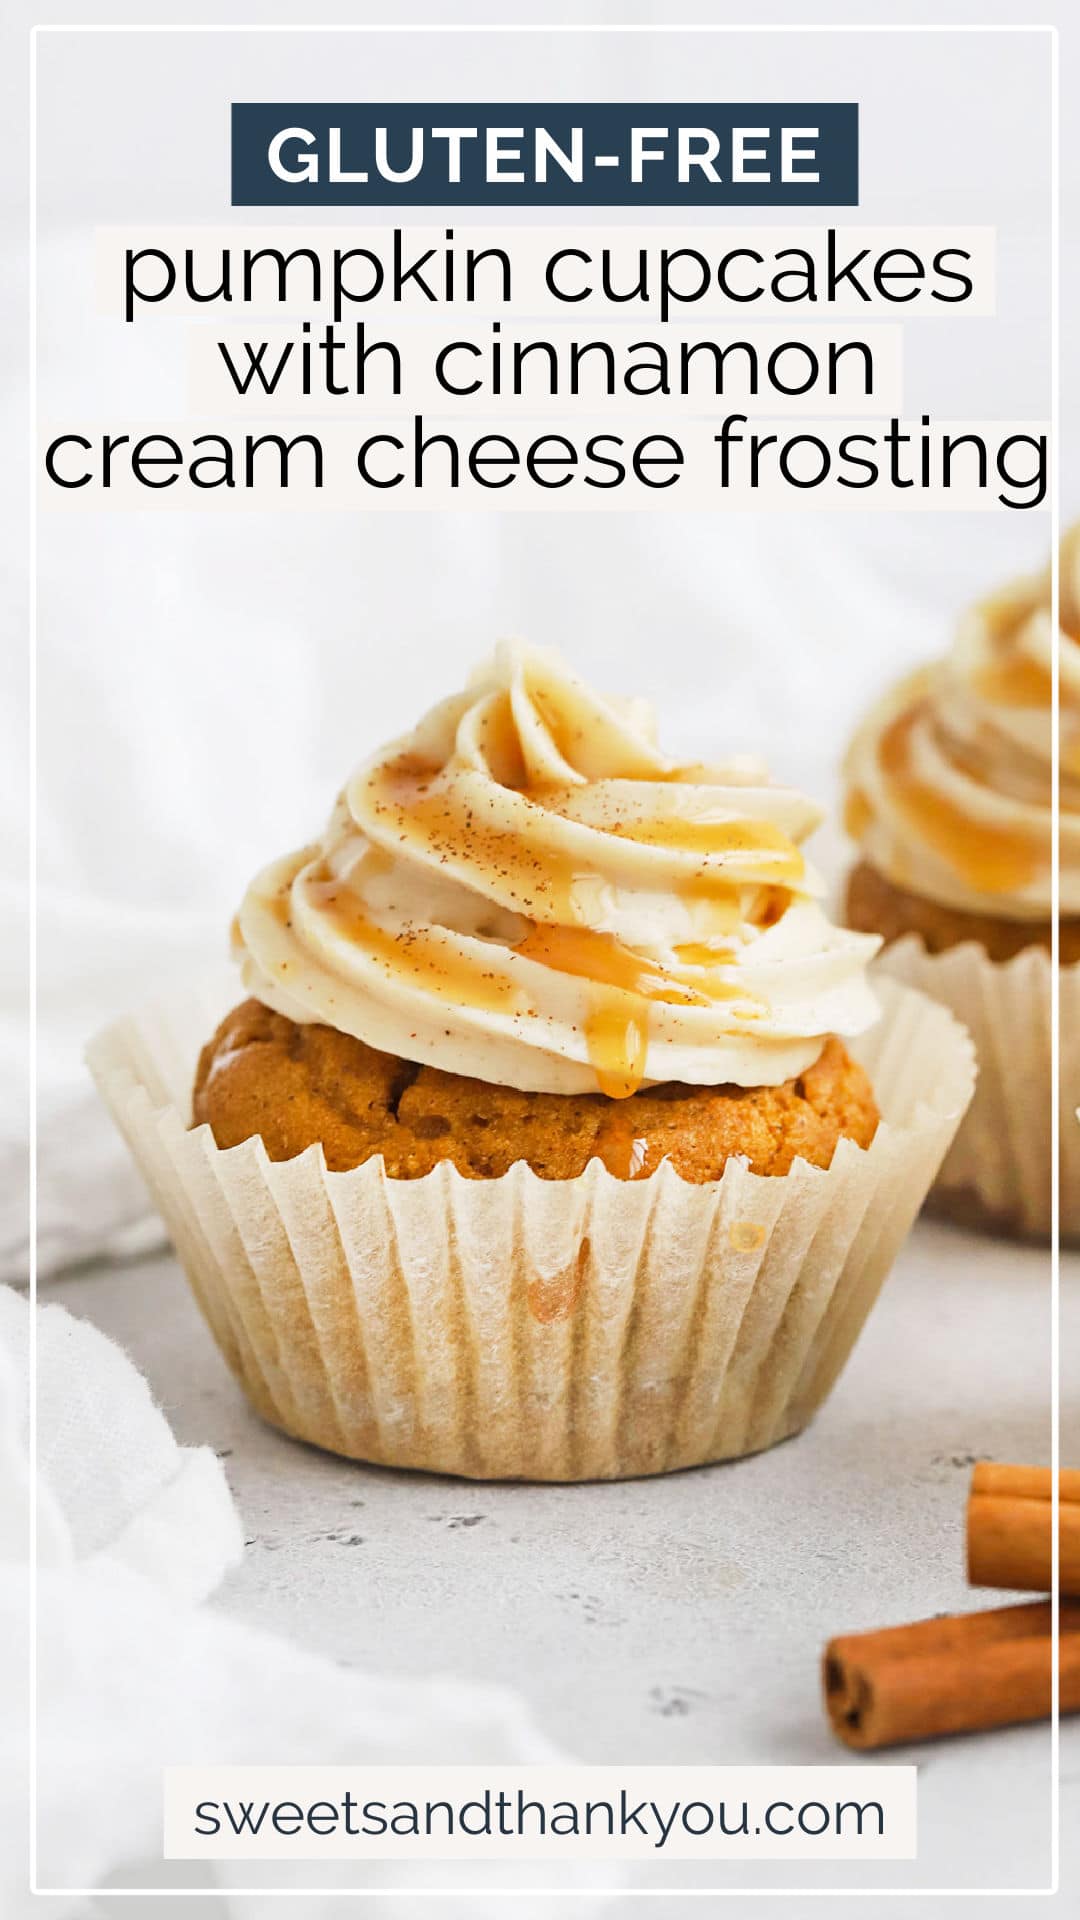 Gluten-Free Pumpkin Cupcakes With Cinnamon Cream Cheese Frosting - My favorite gluten-free pumpkin cupcake recipe with warm spices and a frosting you'll love! // Gluten-Free cupcakes // gluten free pumpkin cake // cinnamon cream cheese frosting recipe // #glutenfree #cupcakes #pumpkincupcakes #glutenfreepumpkin #glutenfreecake #glutenfreebaking